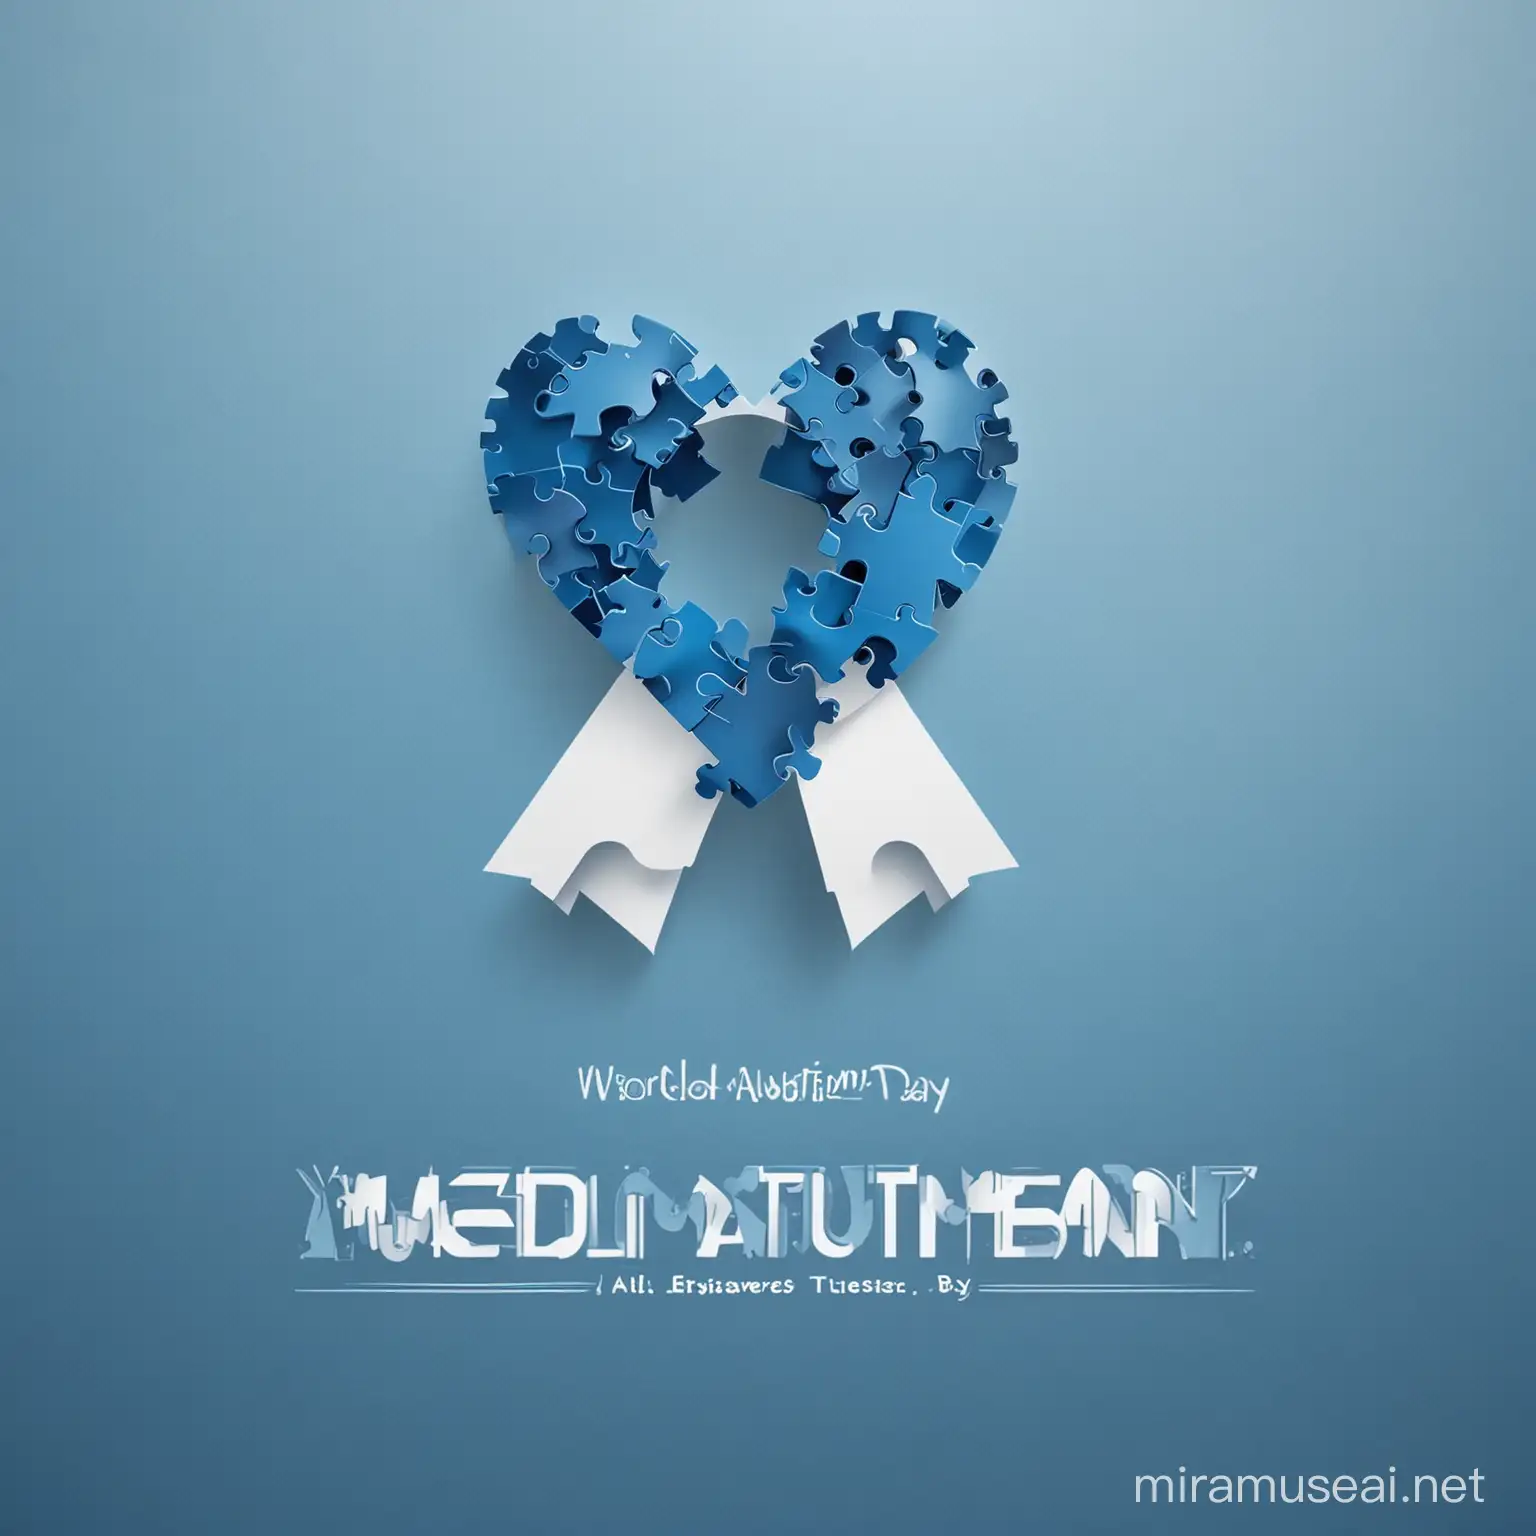 World Autism Day Celebration with Blue Puzzle Pieces Background